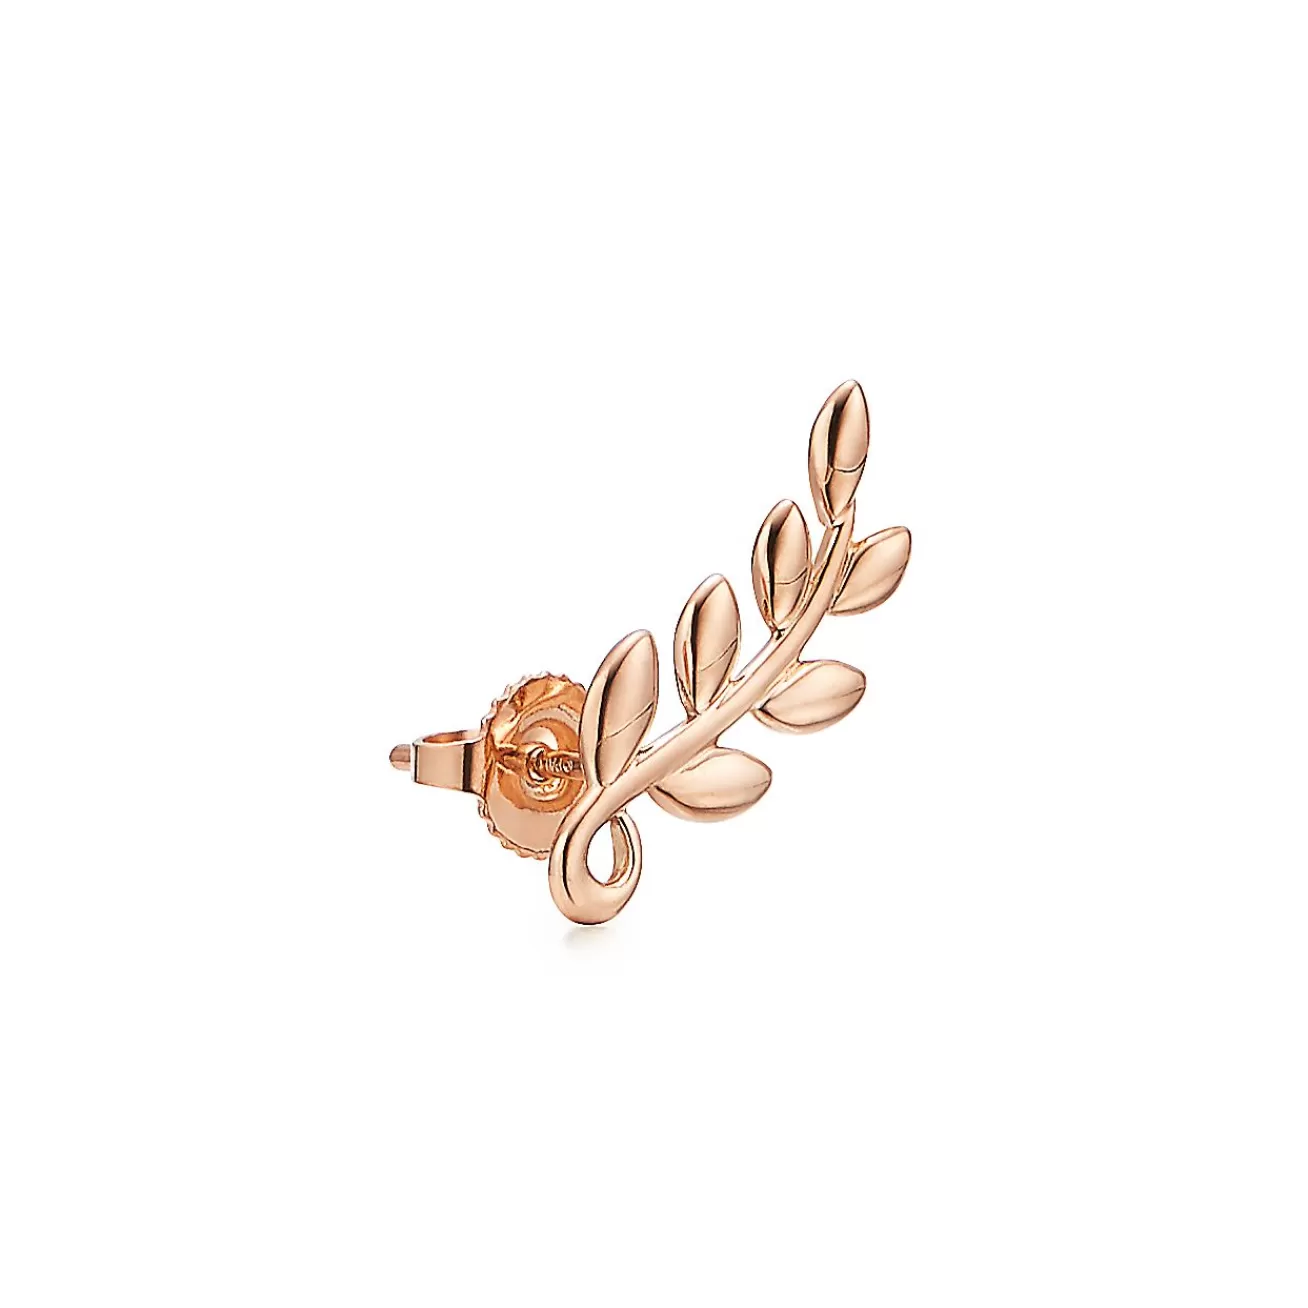 Tiffany & Co. Paloma Picasso® Olive Leaf climber earrings in 18k rose gold. | ^ Earrings | Rose Gold Jewelry